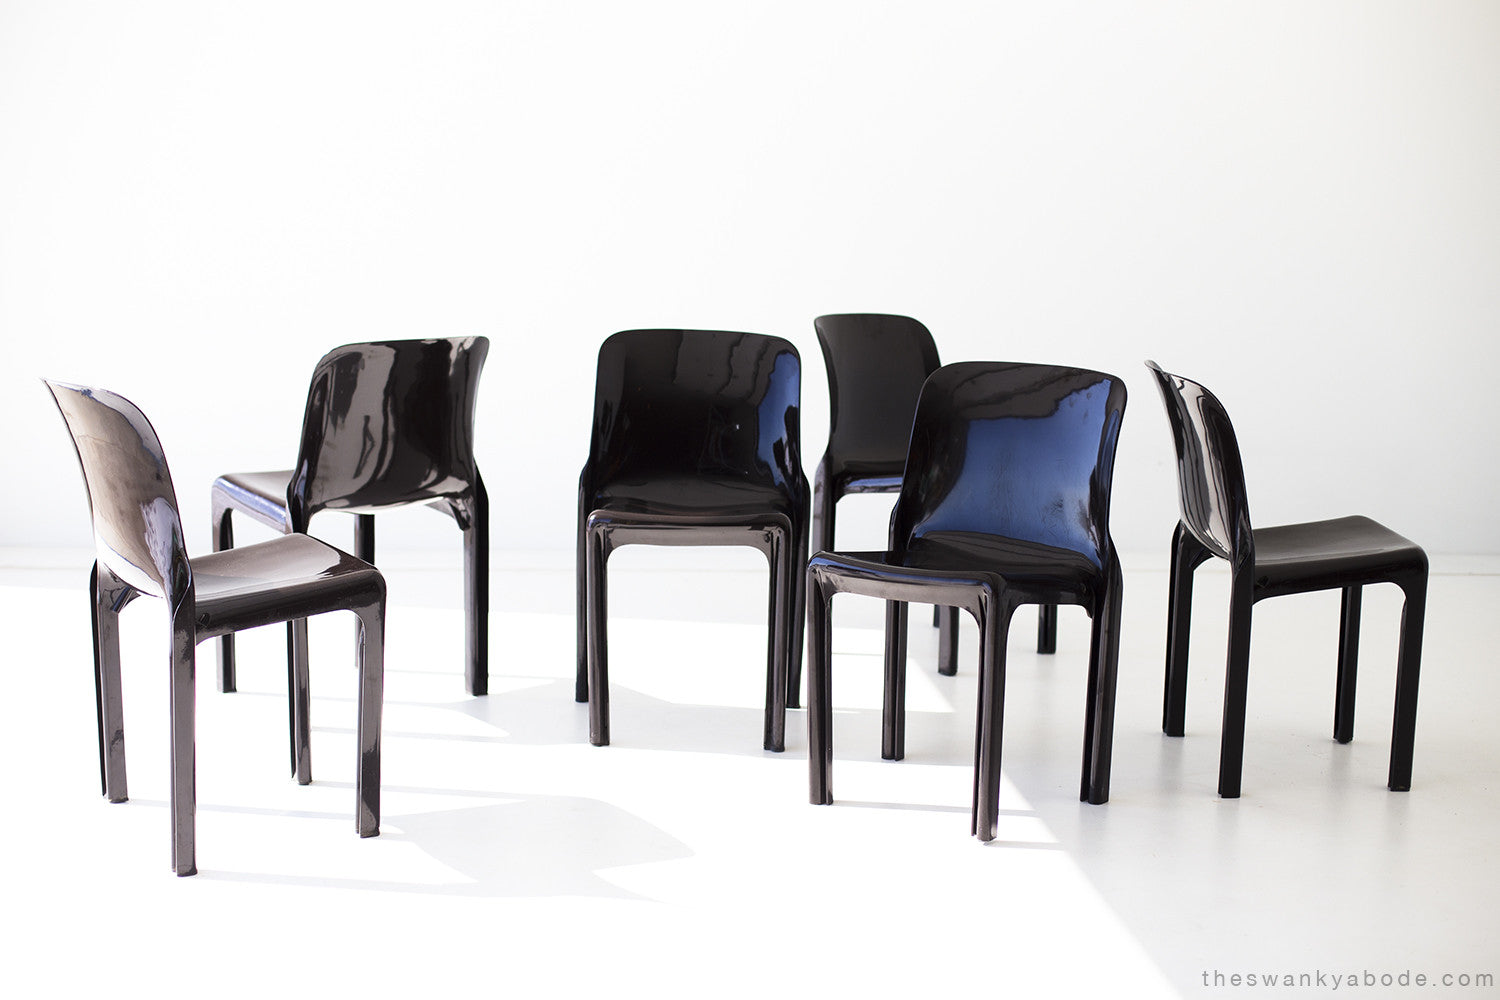 Vico Magistretti Stacking Chairs for Artemide - 01191621, 01